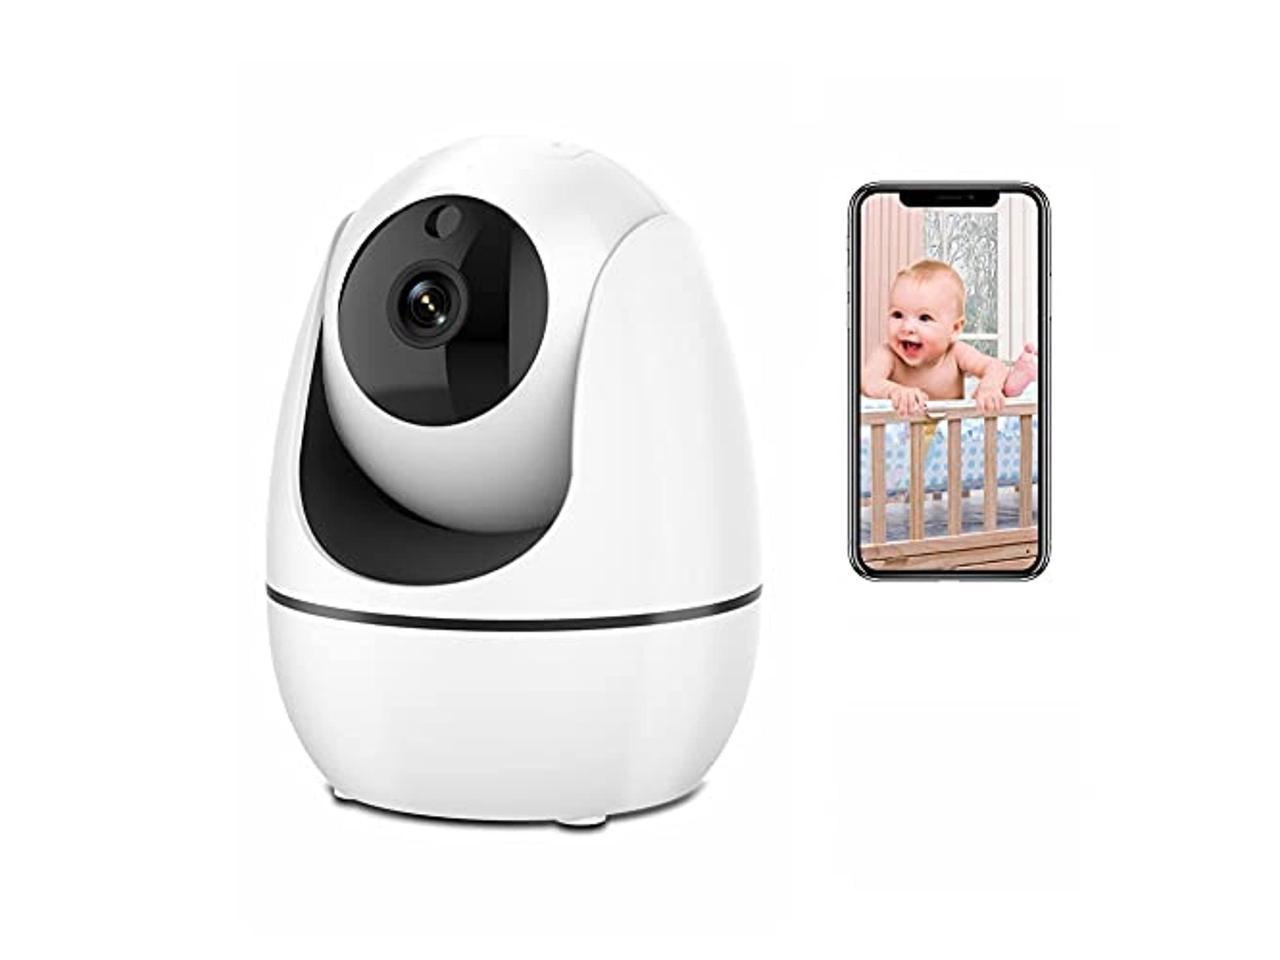 cloud baby monitor record